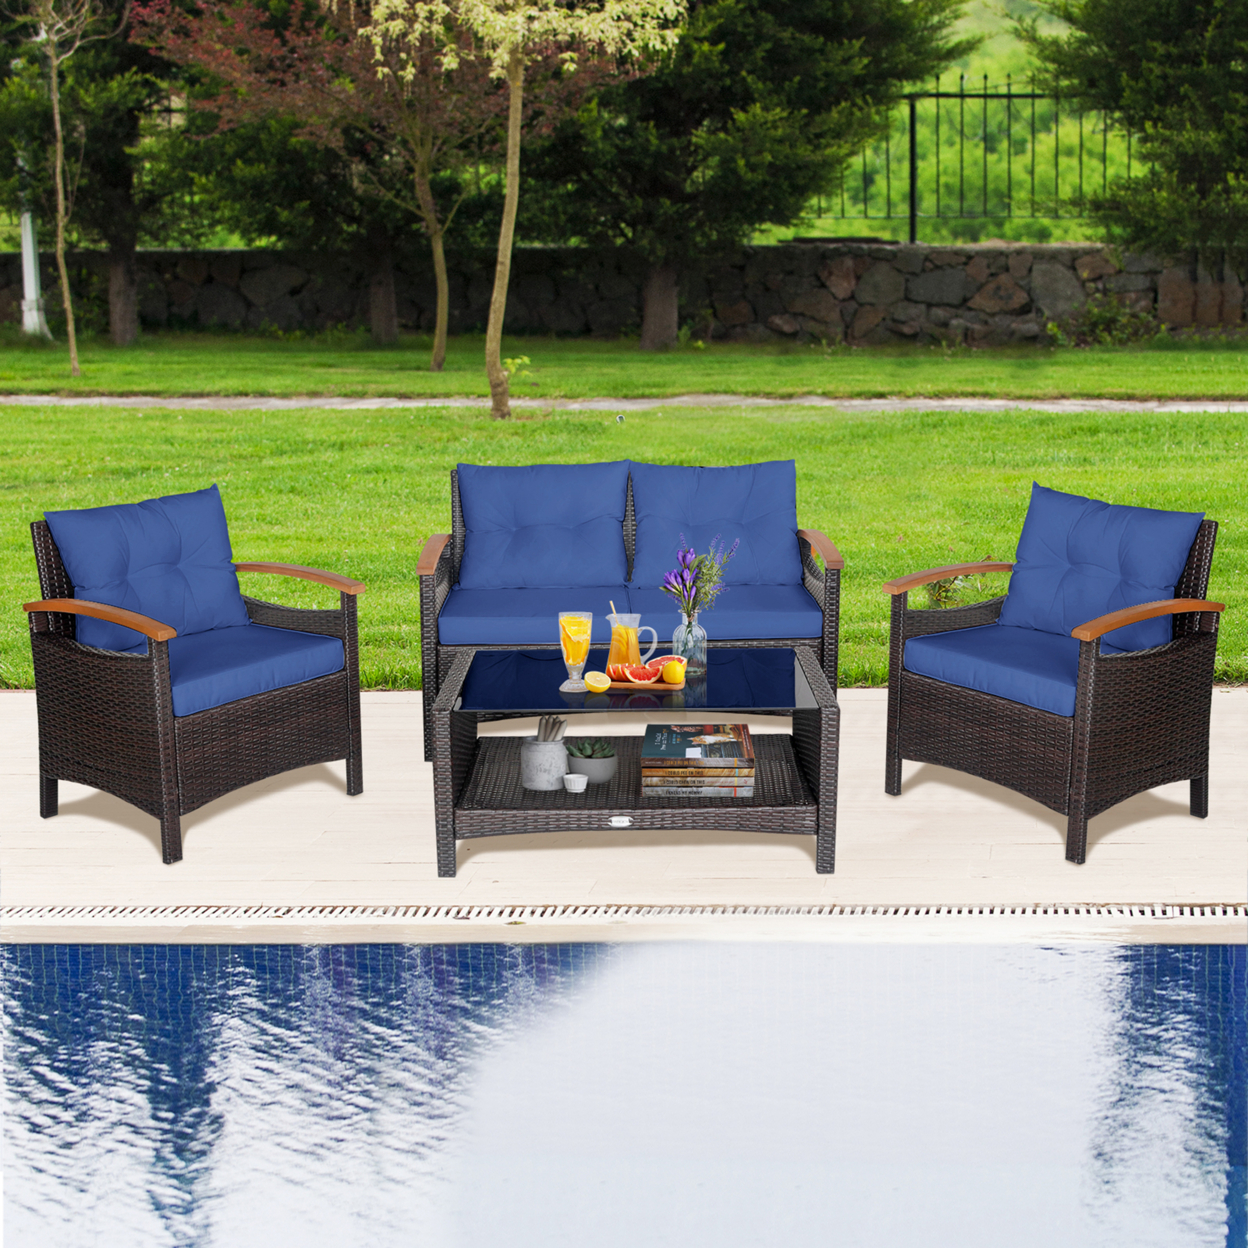 4-Piece Patio Rattan Furniture Set W/ Cushioned Sofa And Coffee Table Navy